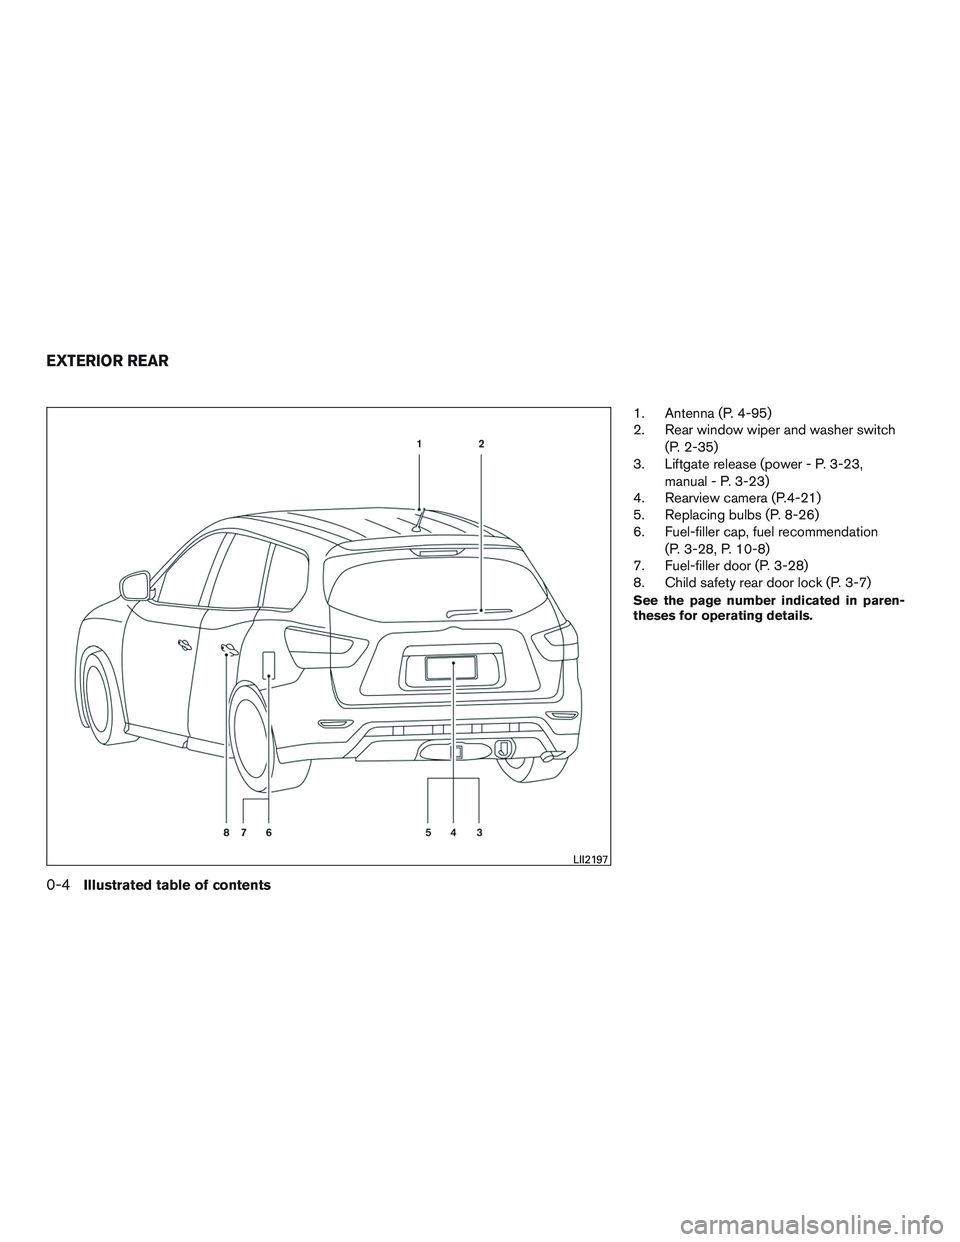 NISSAN PATHFINDER HYBRID 2015  Owners Manual 1. Antenna (P. 4-95)
2. Rear window wiper and washer switch
(P. 2-35)
3. Liftgate release (power - P. 3-23,
manual - P. 3-23)
4. Rearview camera (P.4-21)
5. Replacing bulbs (P. 8-26)
6. Fuel-filler ca